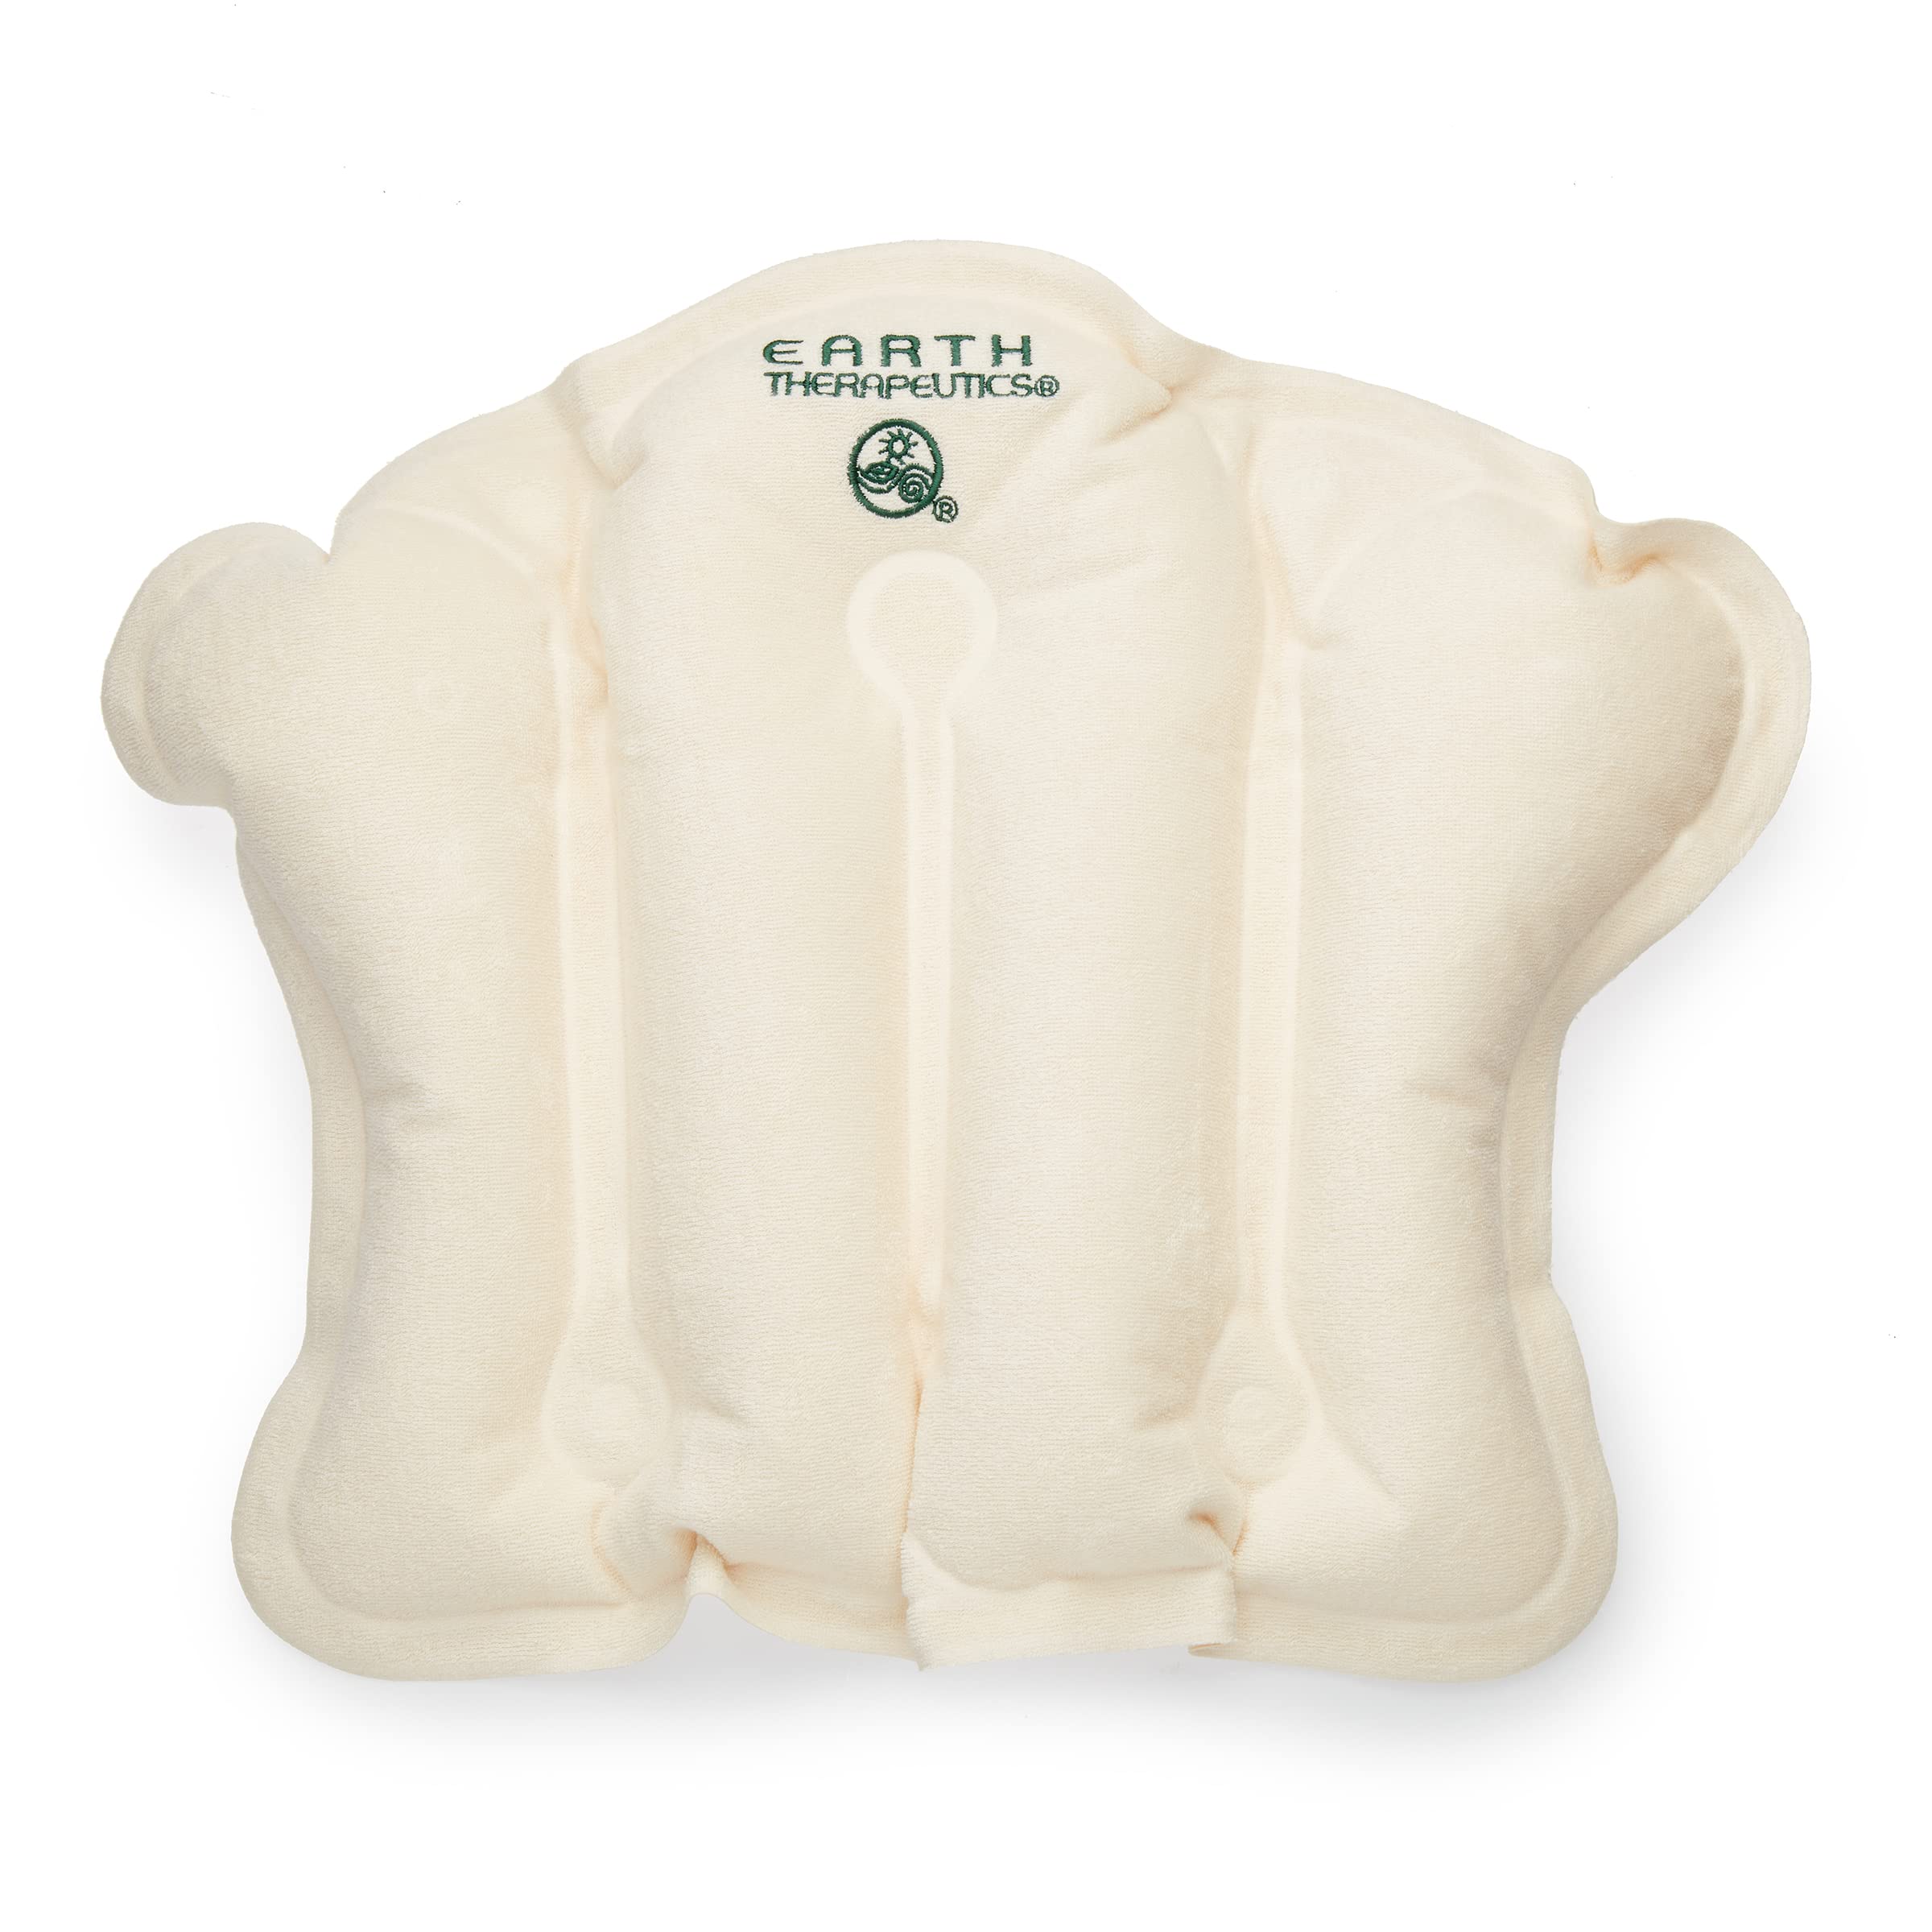 Earth Therapeutics Terry Covered Bath Pillow, Natural